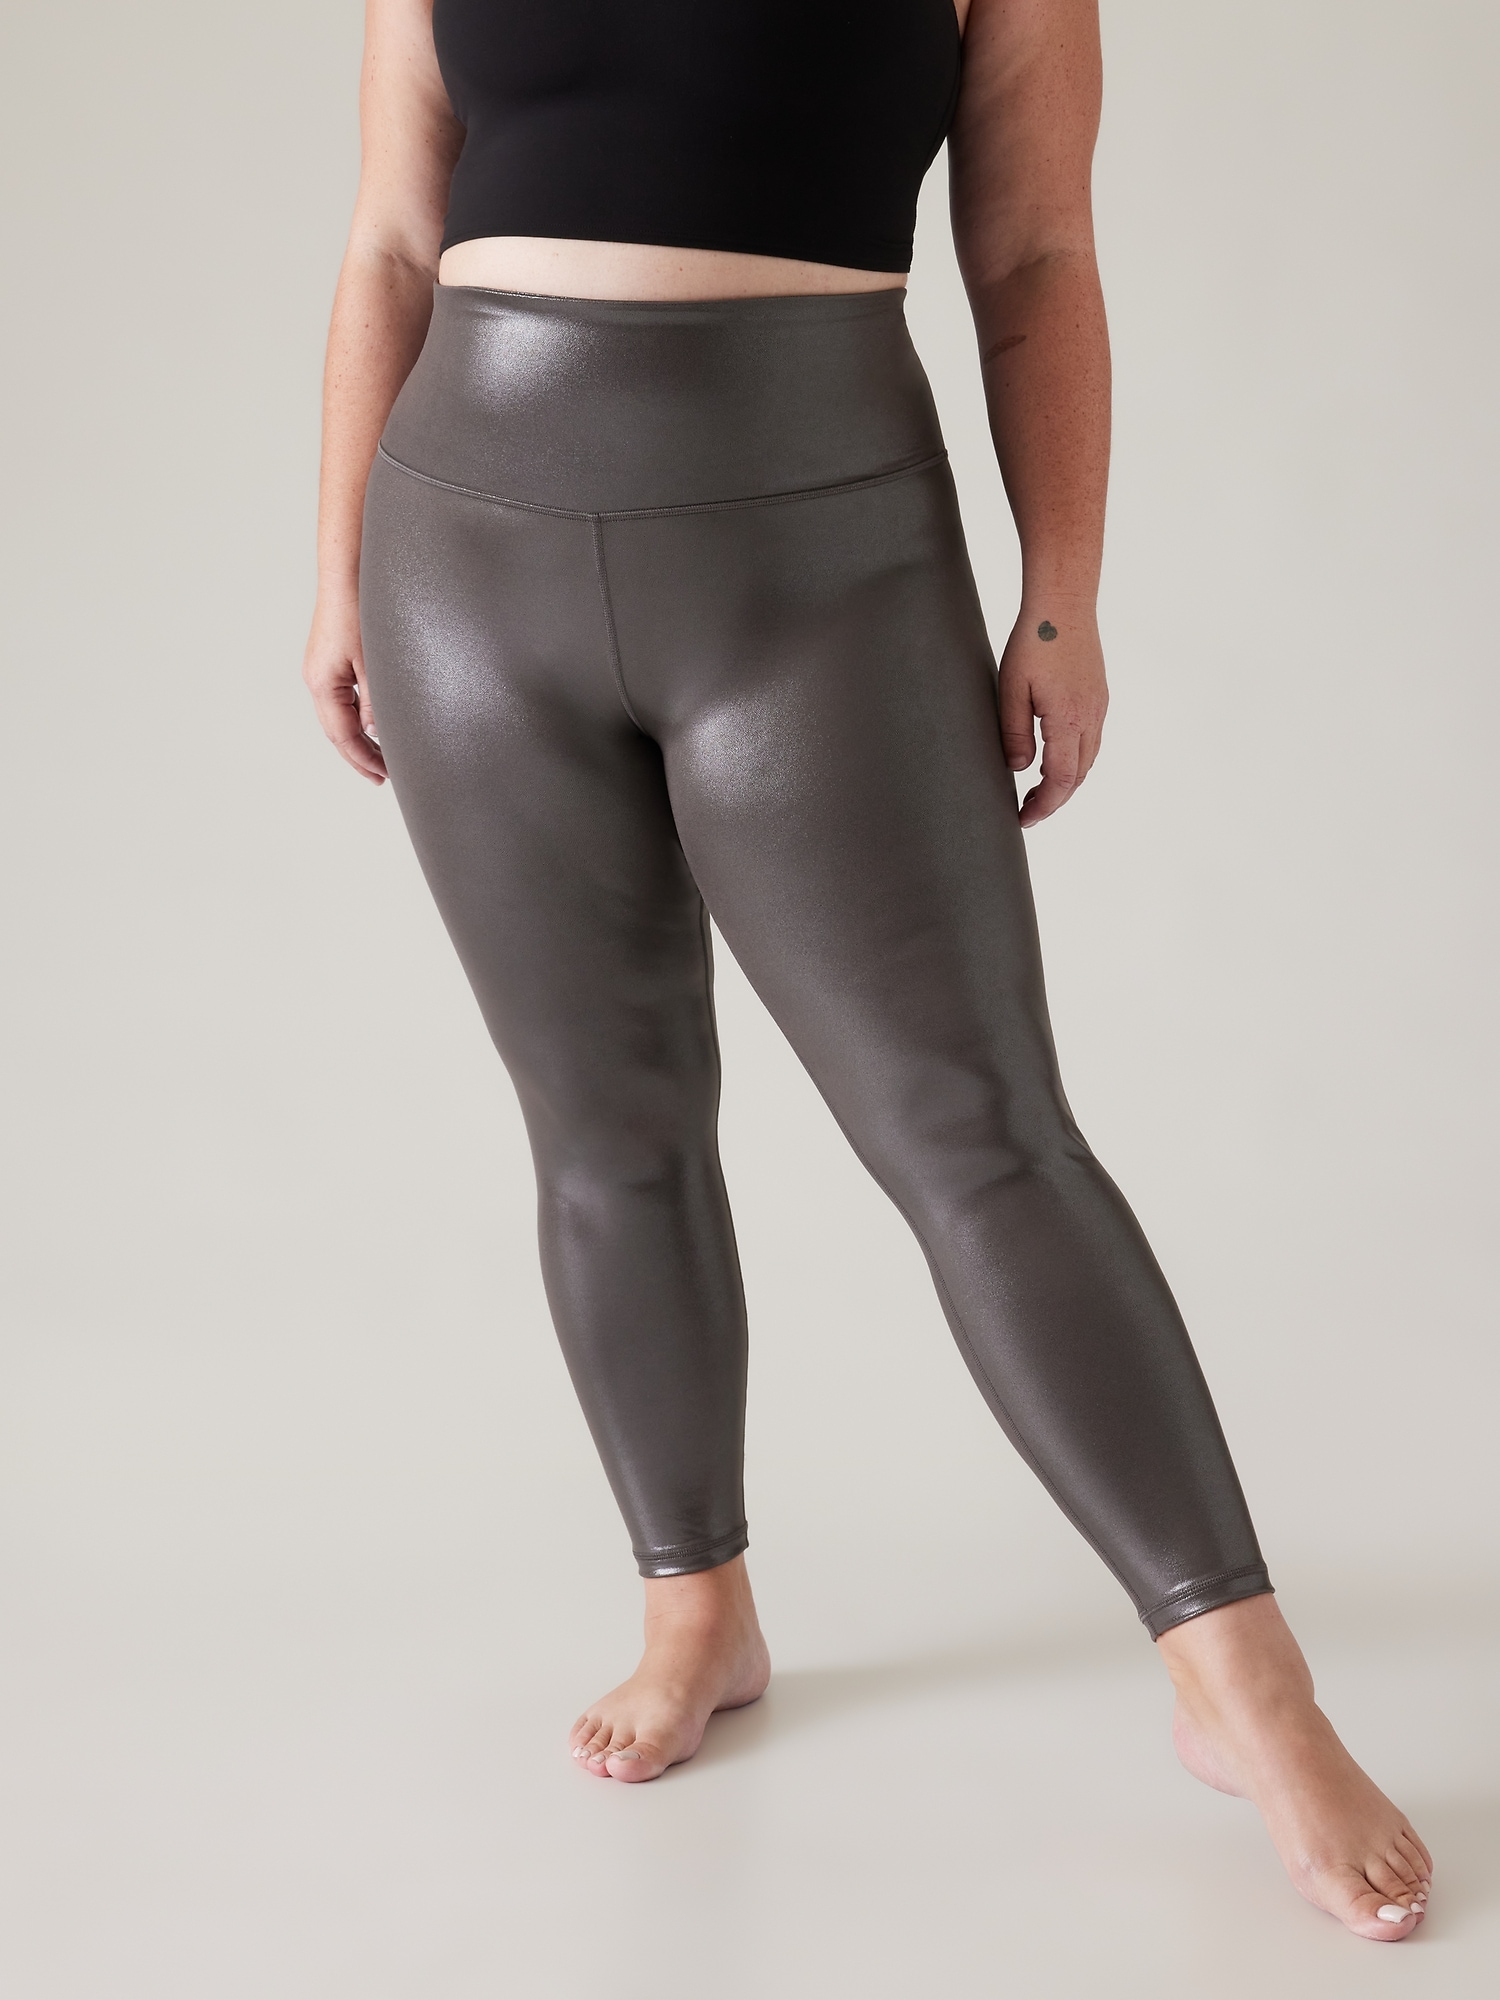 3 plus-size leggings that don't fall down in sizes 1X to 5X